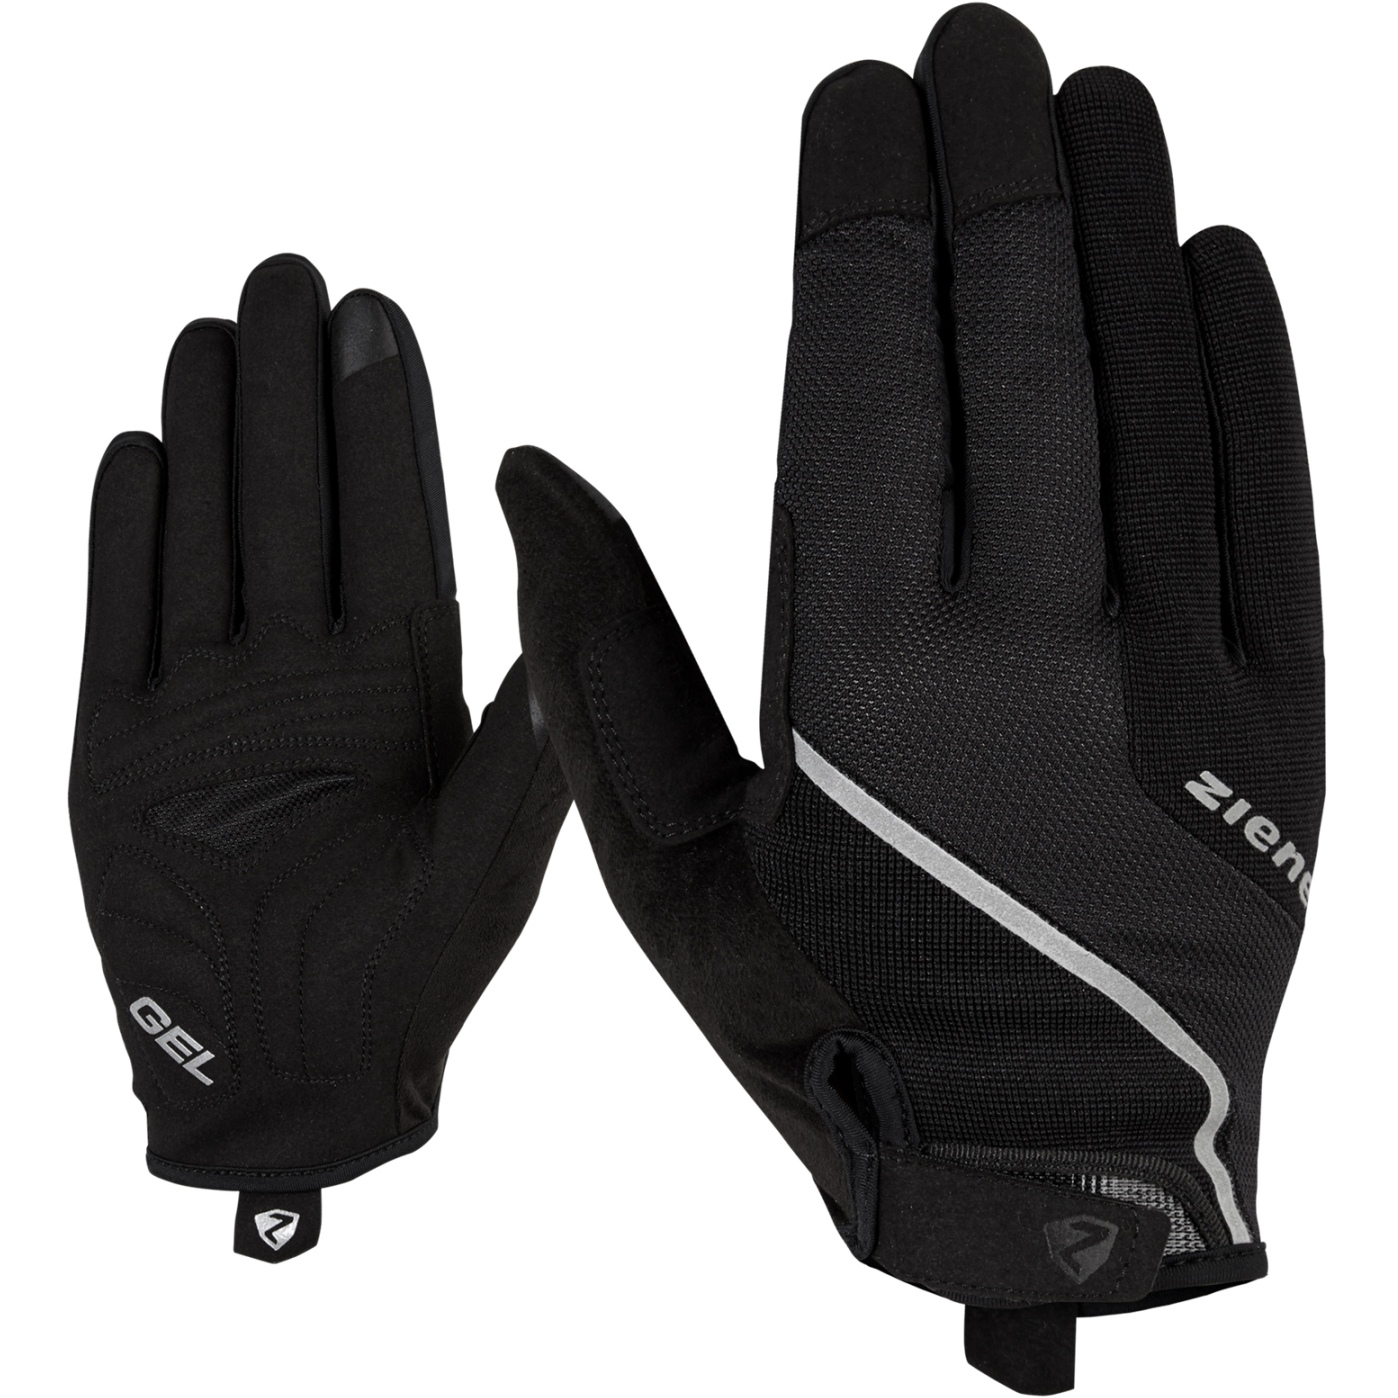 Picture of Ziener Clyo Touch Long Bike Gloves - black